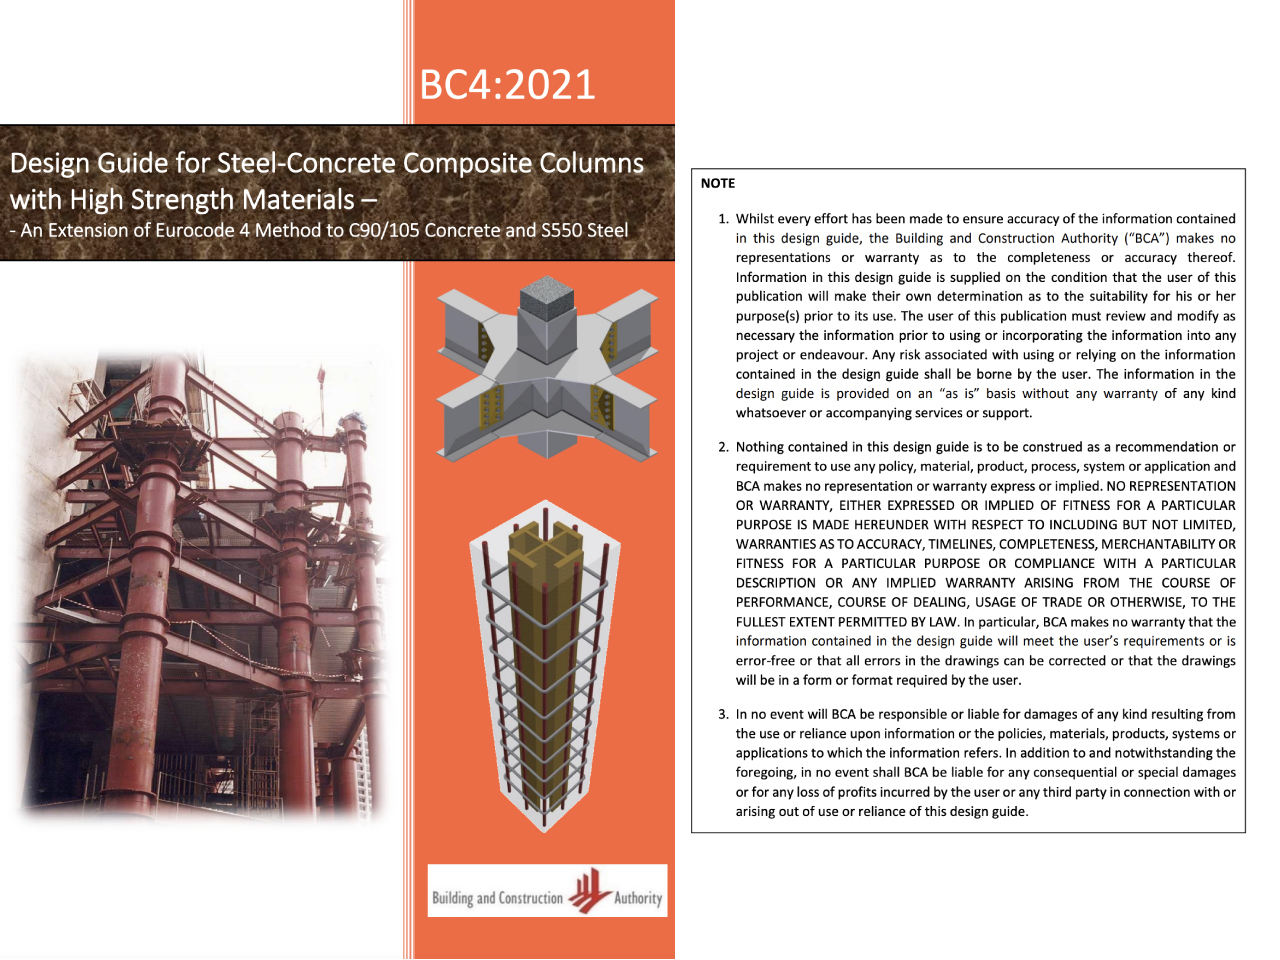 Design Guide for Steel-Concrete Composite Columns with High Strength Materials - An Extension of Eurocode 4 Method to C90/105 Concrete and S550 Steel